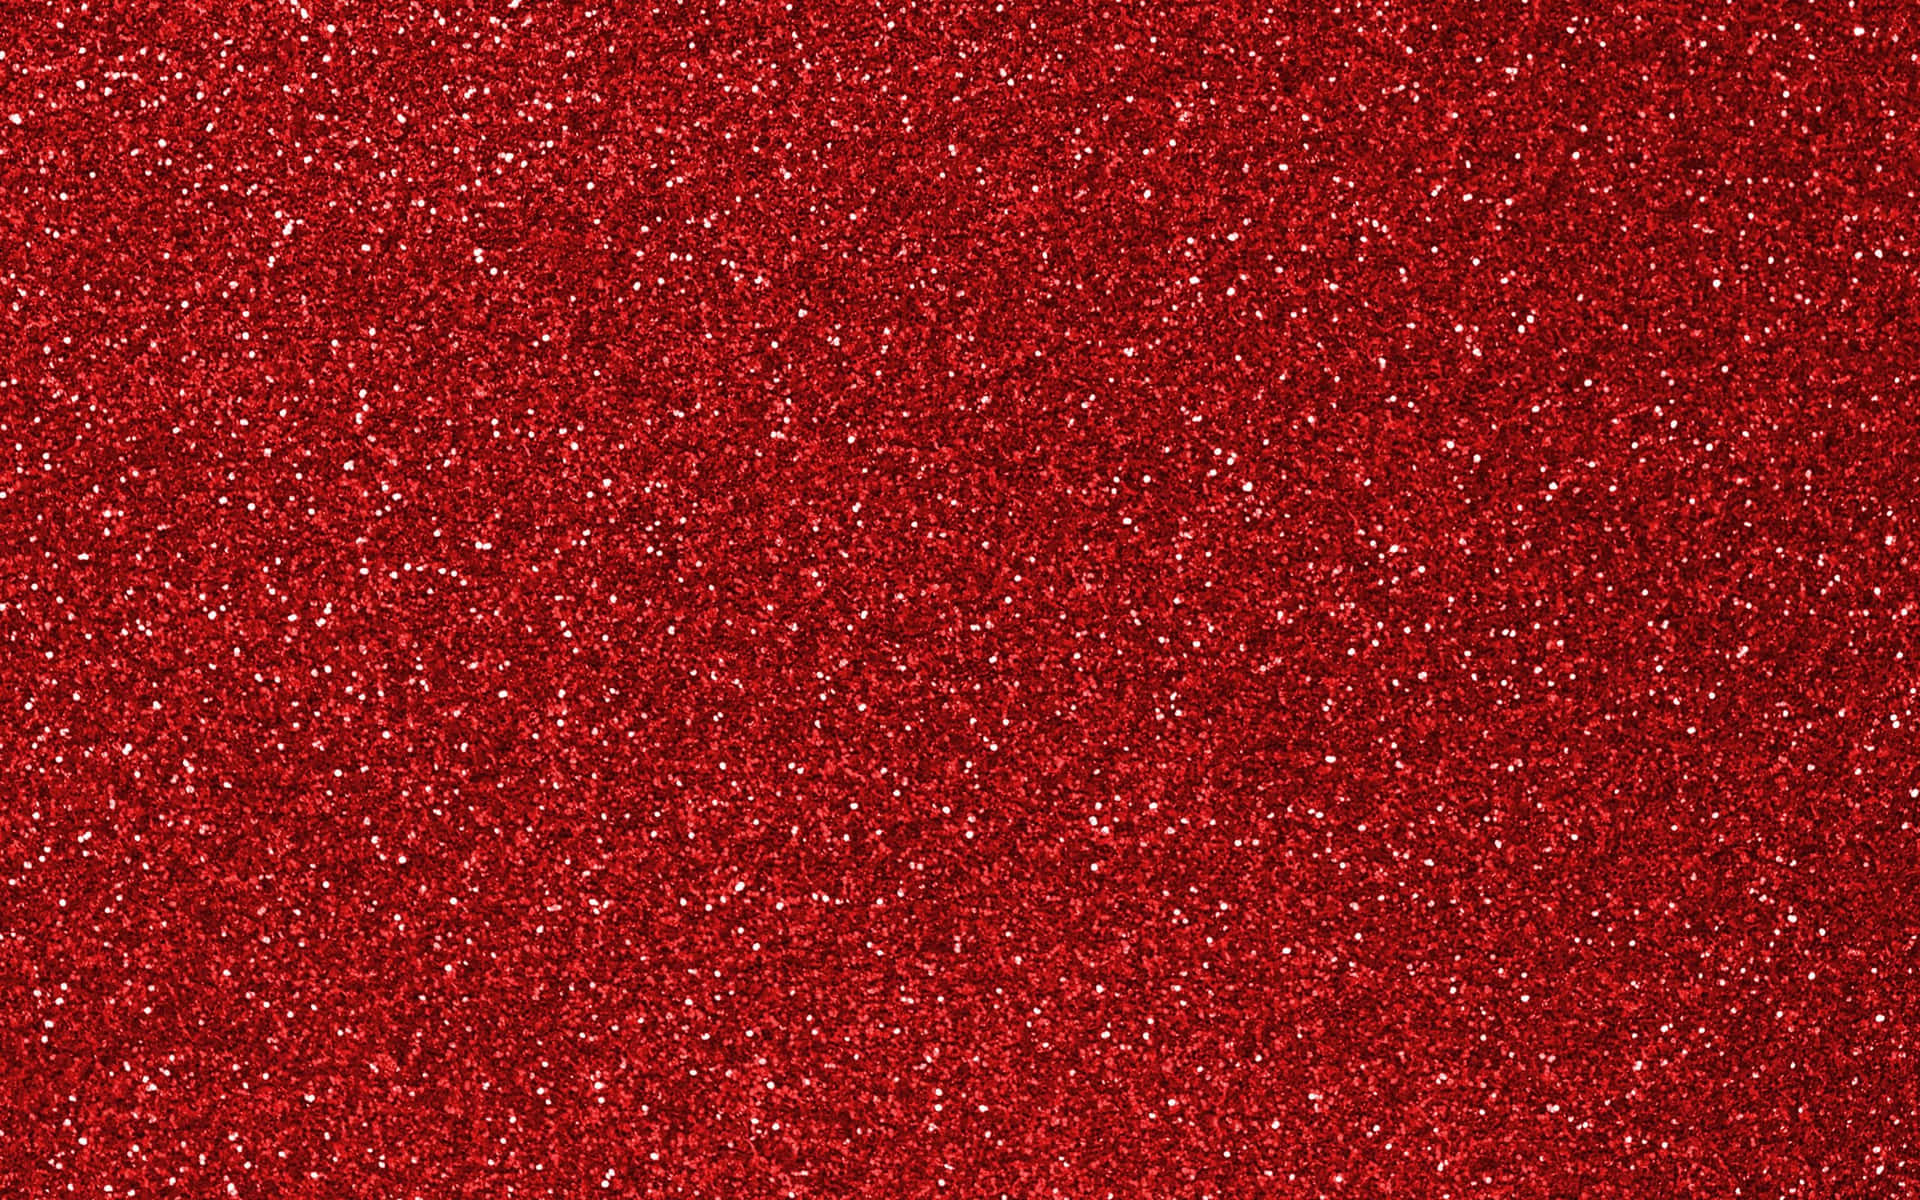 Brighten up your life with a touch of Red Glitter Wallpaper